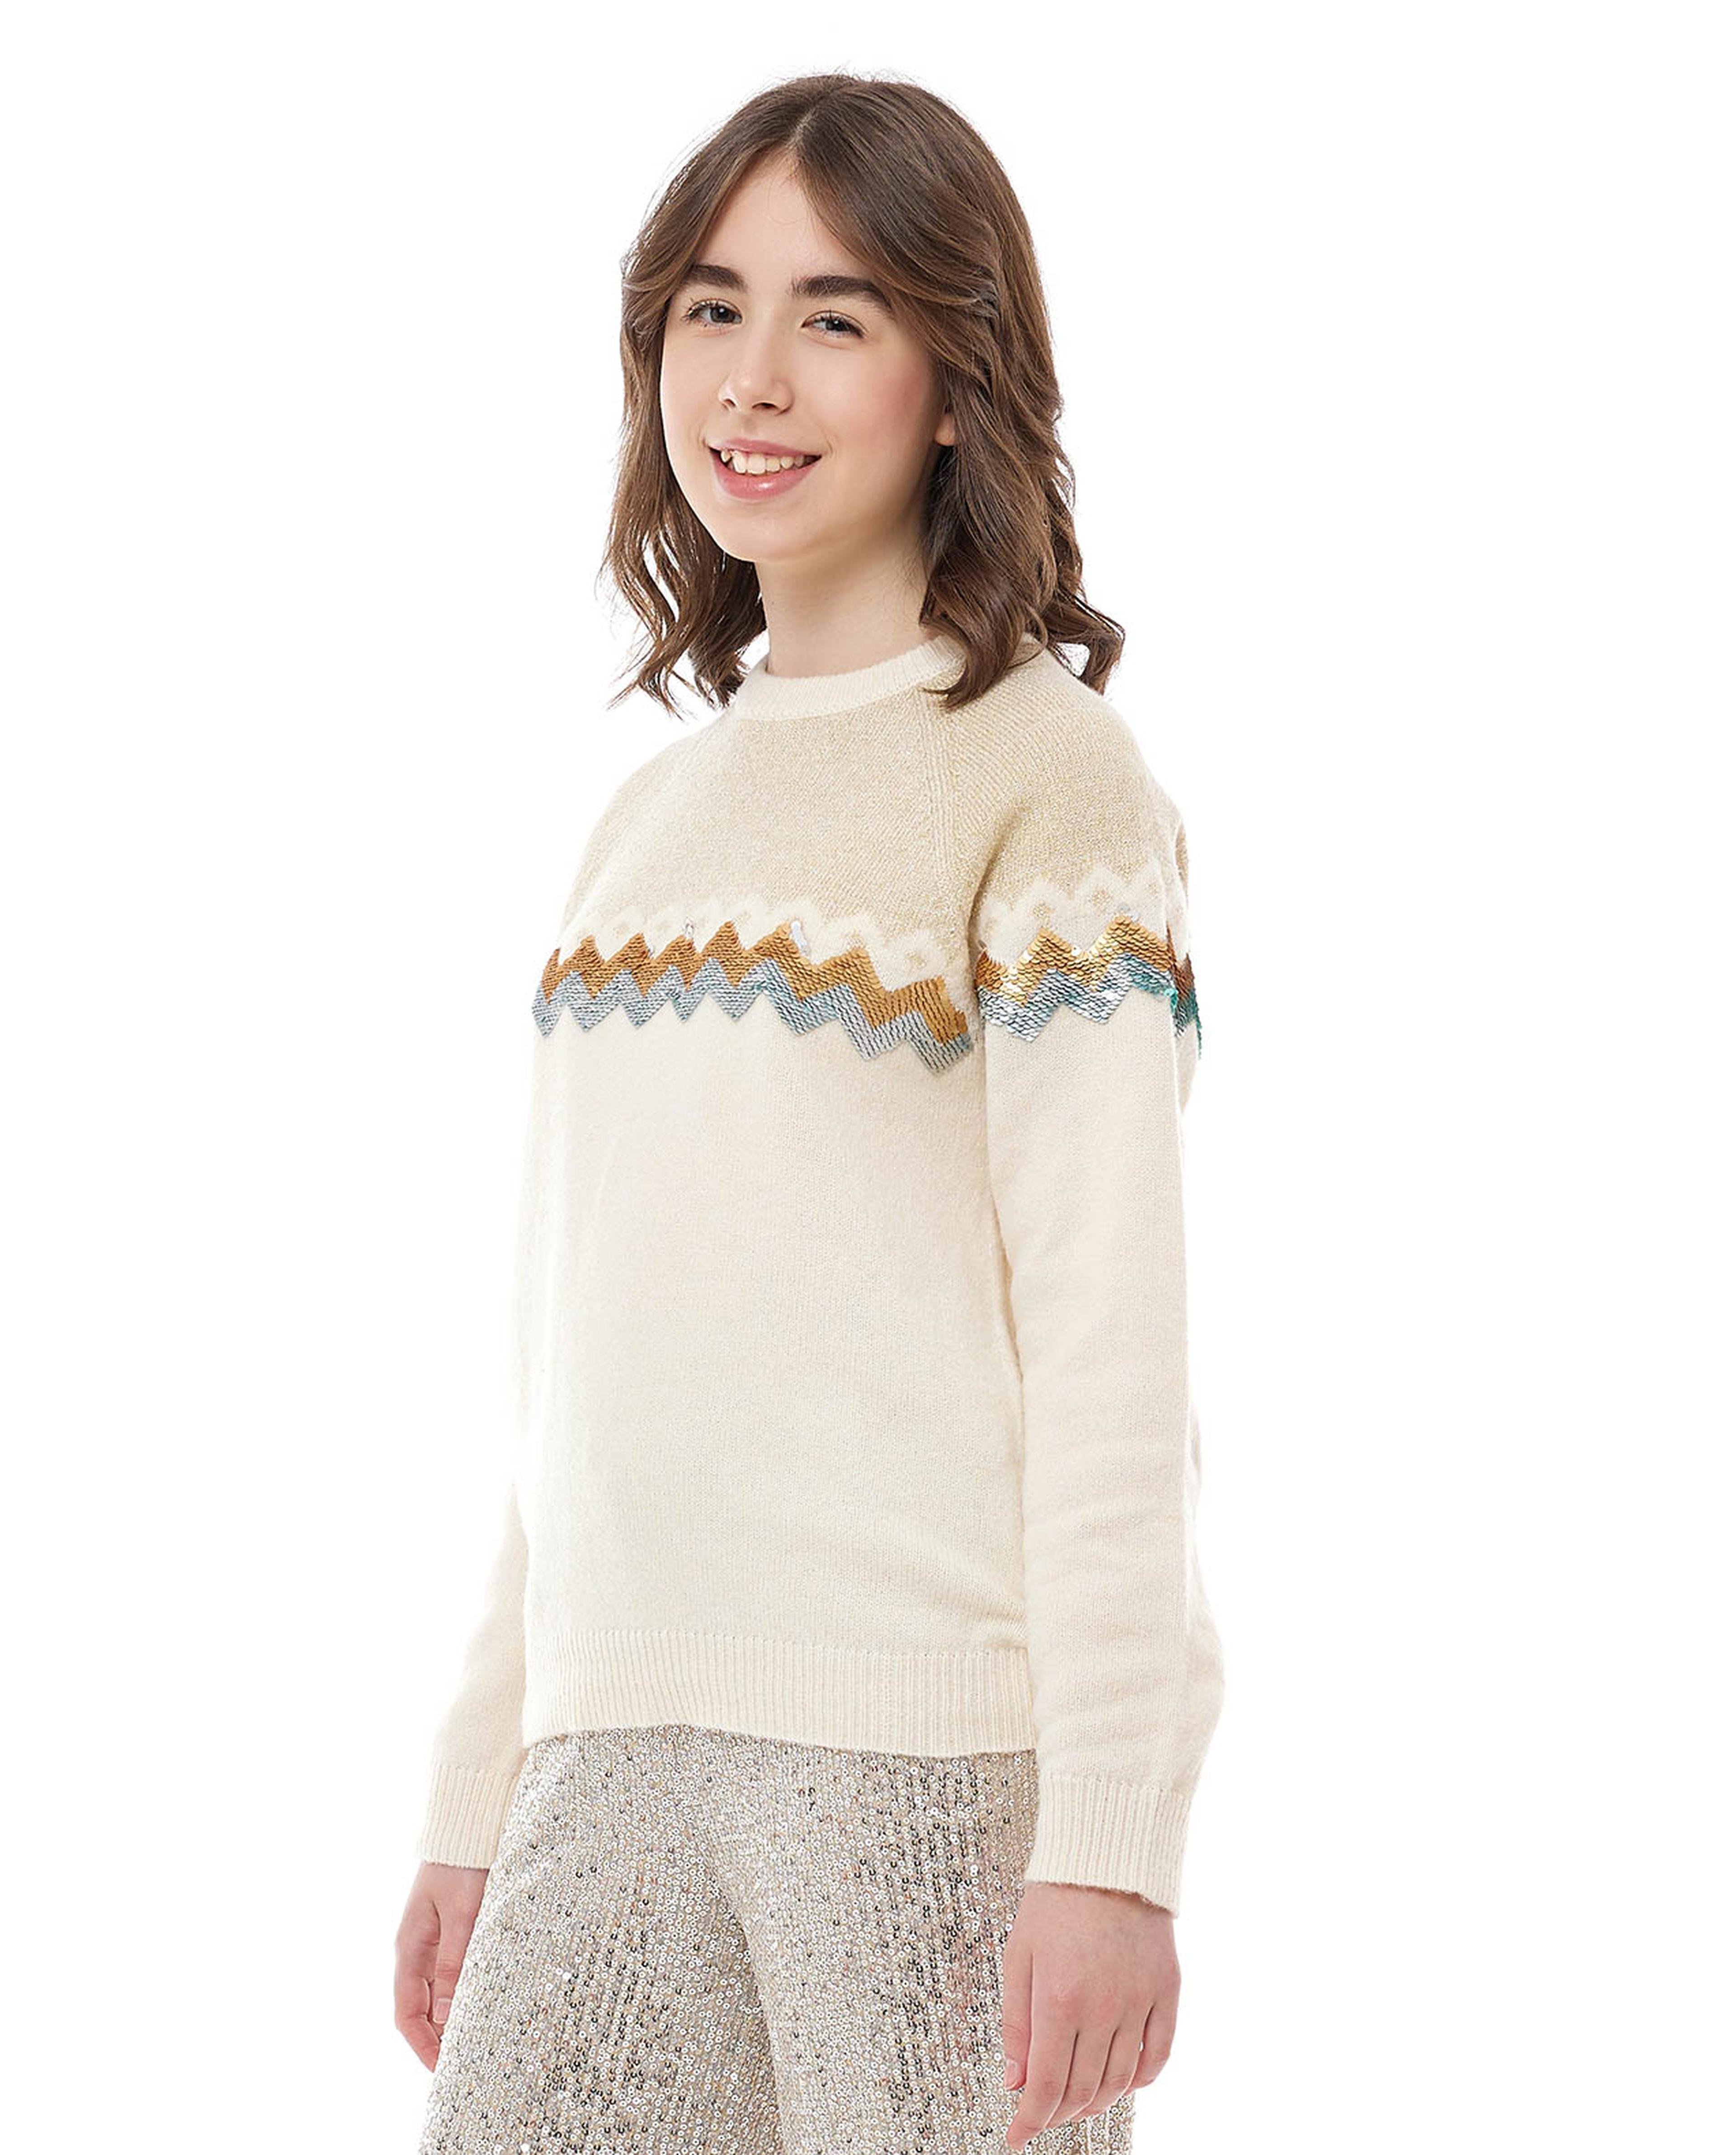 Patterned Sweater with Crew Neck and Long Sleeves